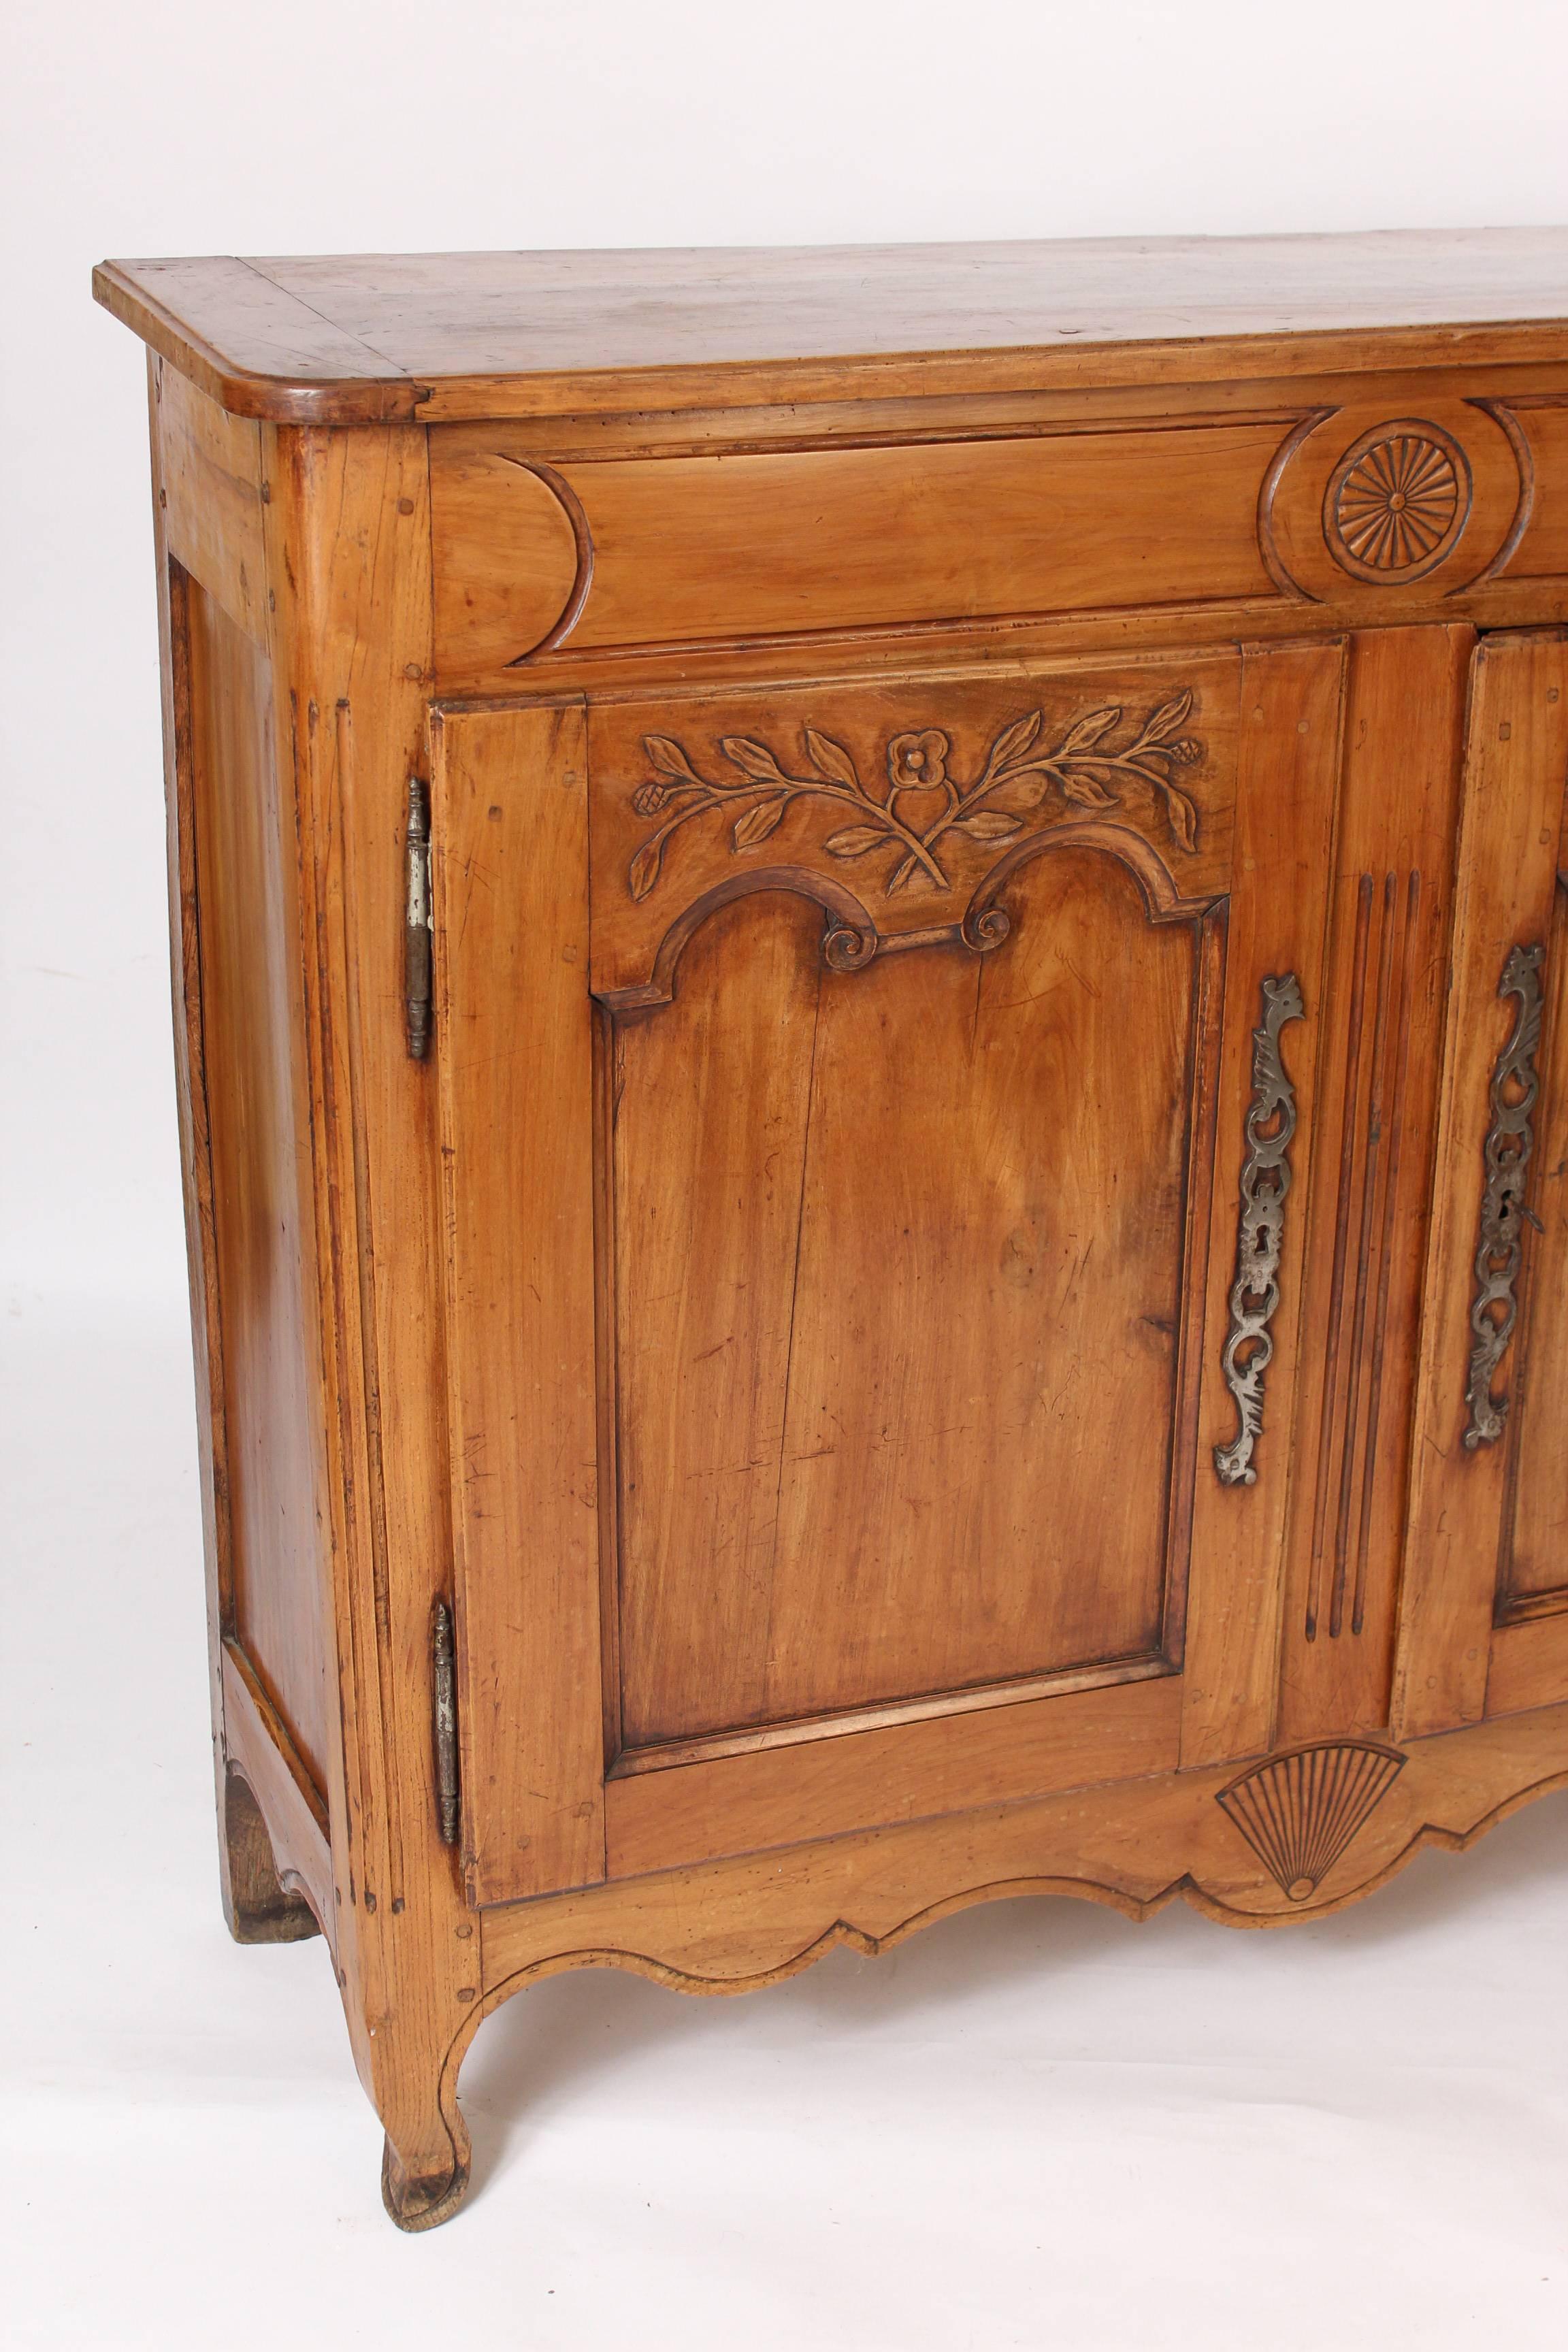 Louis XV Provincial fruit wood buffet with doors, early 19th century. Central carved patera in the frieze, foliate carved doors and a central fan carving in the apron. Nice fruit wood color. Steel escutcheons and hinges. 